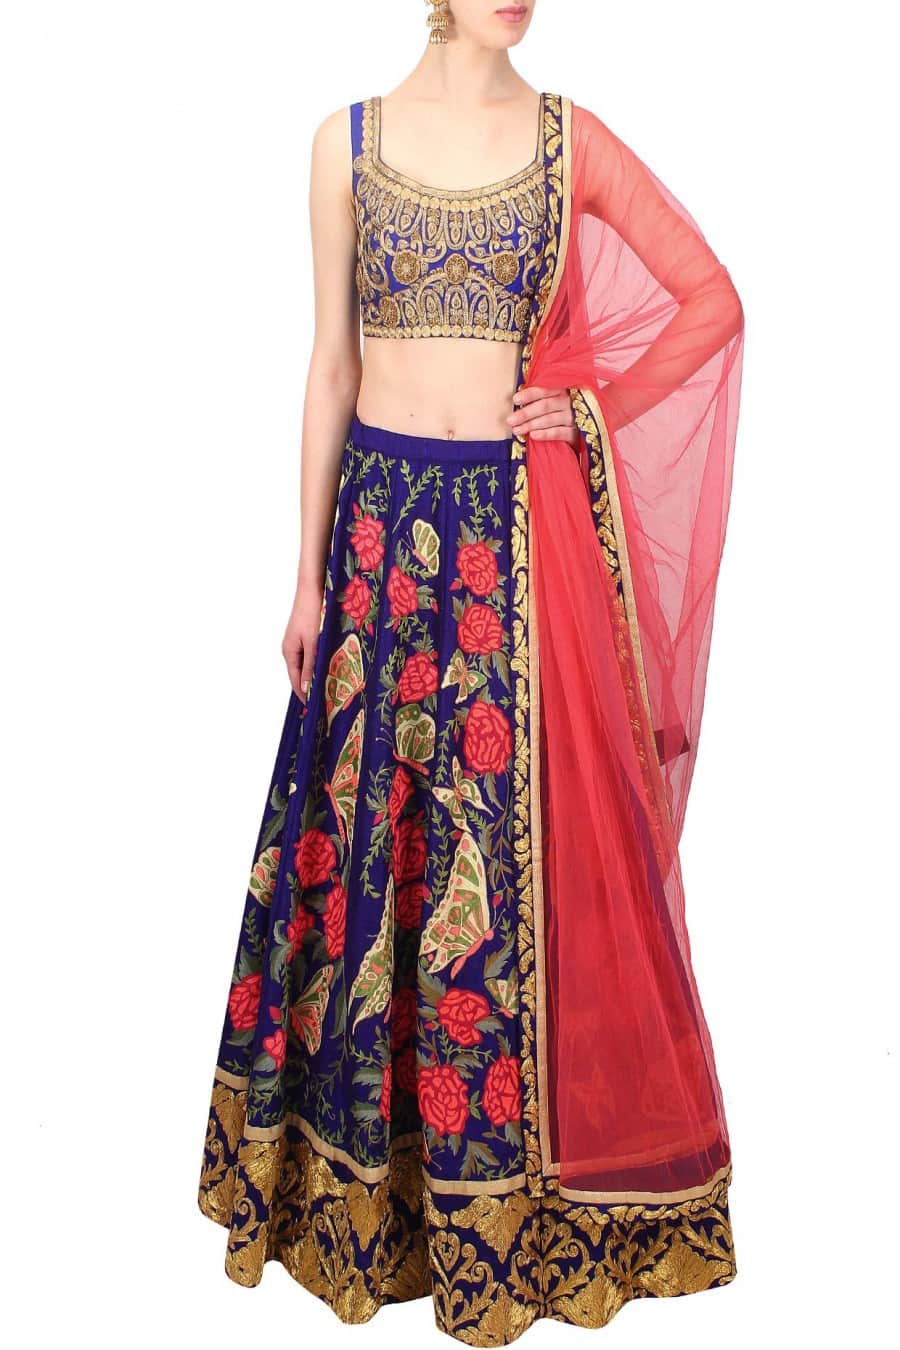 Butterfly and Rose Embroidered Lehenga